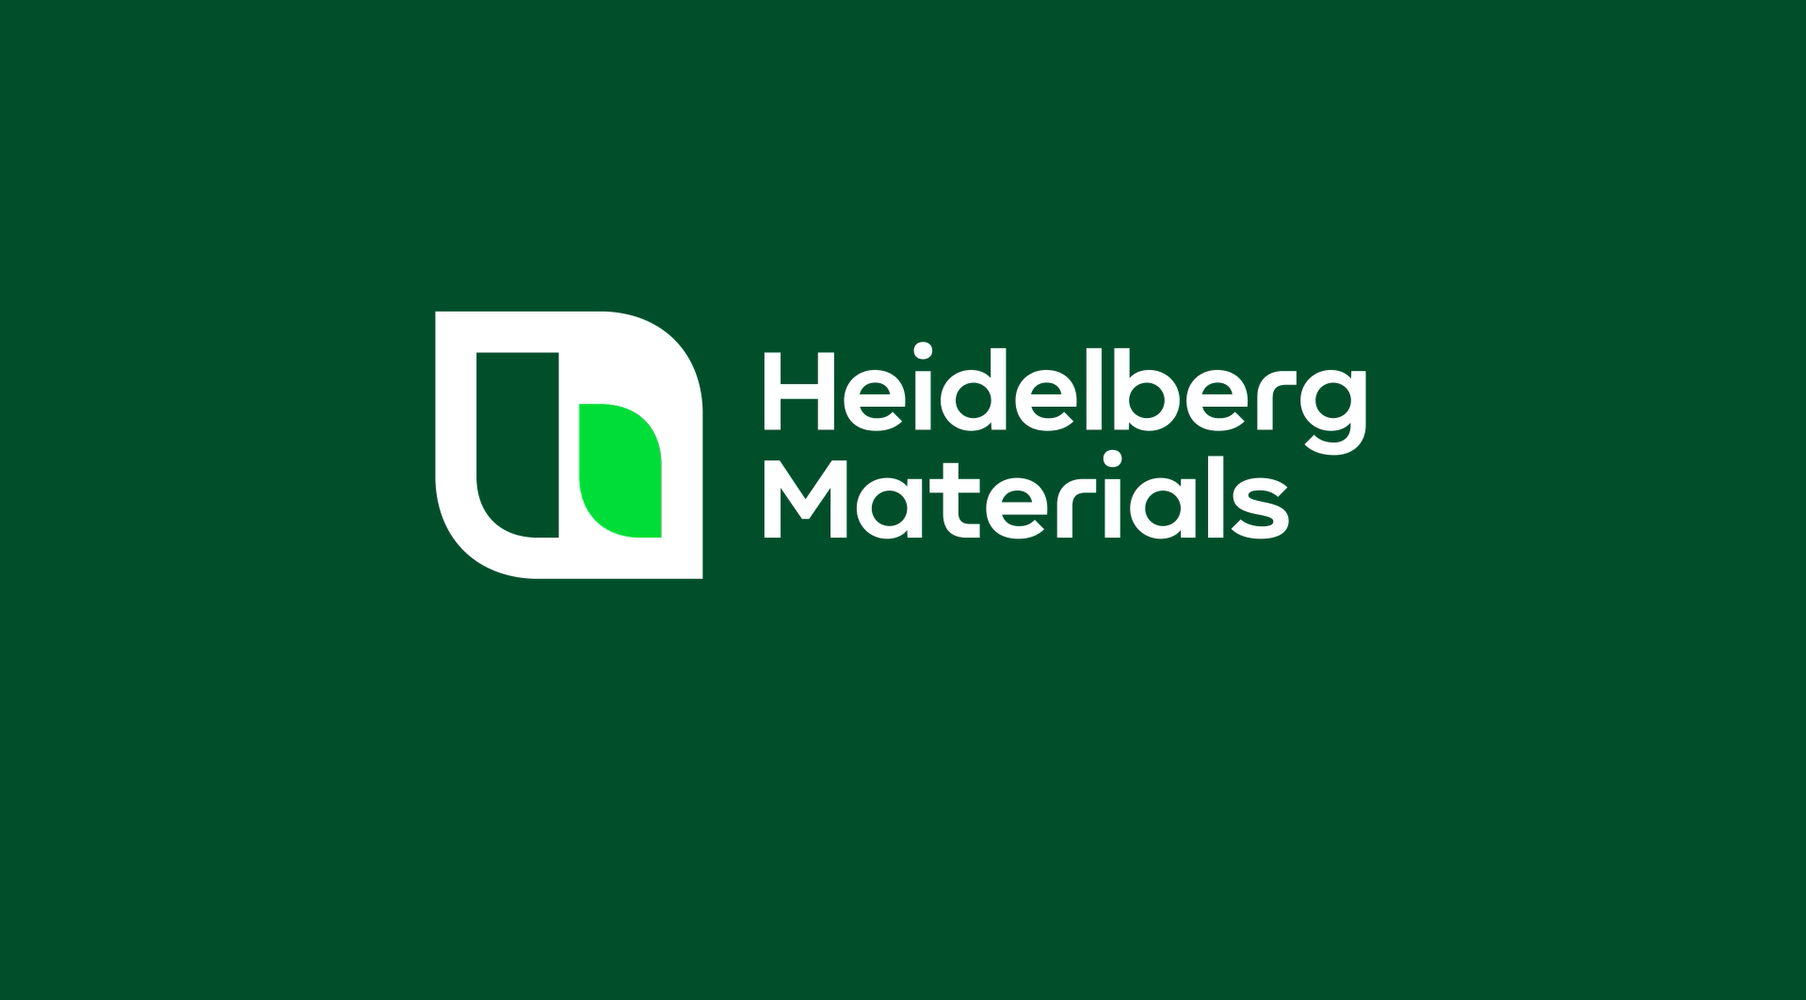 Heidelberg Materials says it actively supports SBTi’s efforts to develop a 1.5°C roadmap for the cement industry